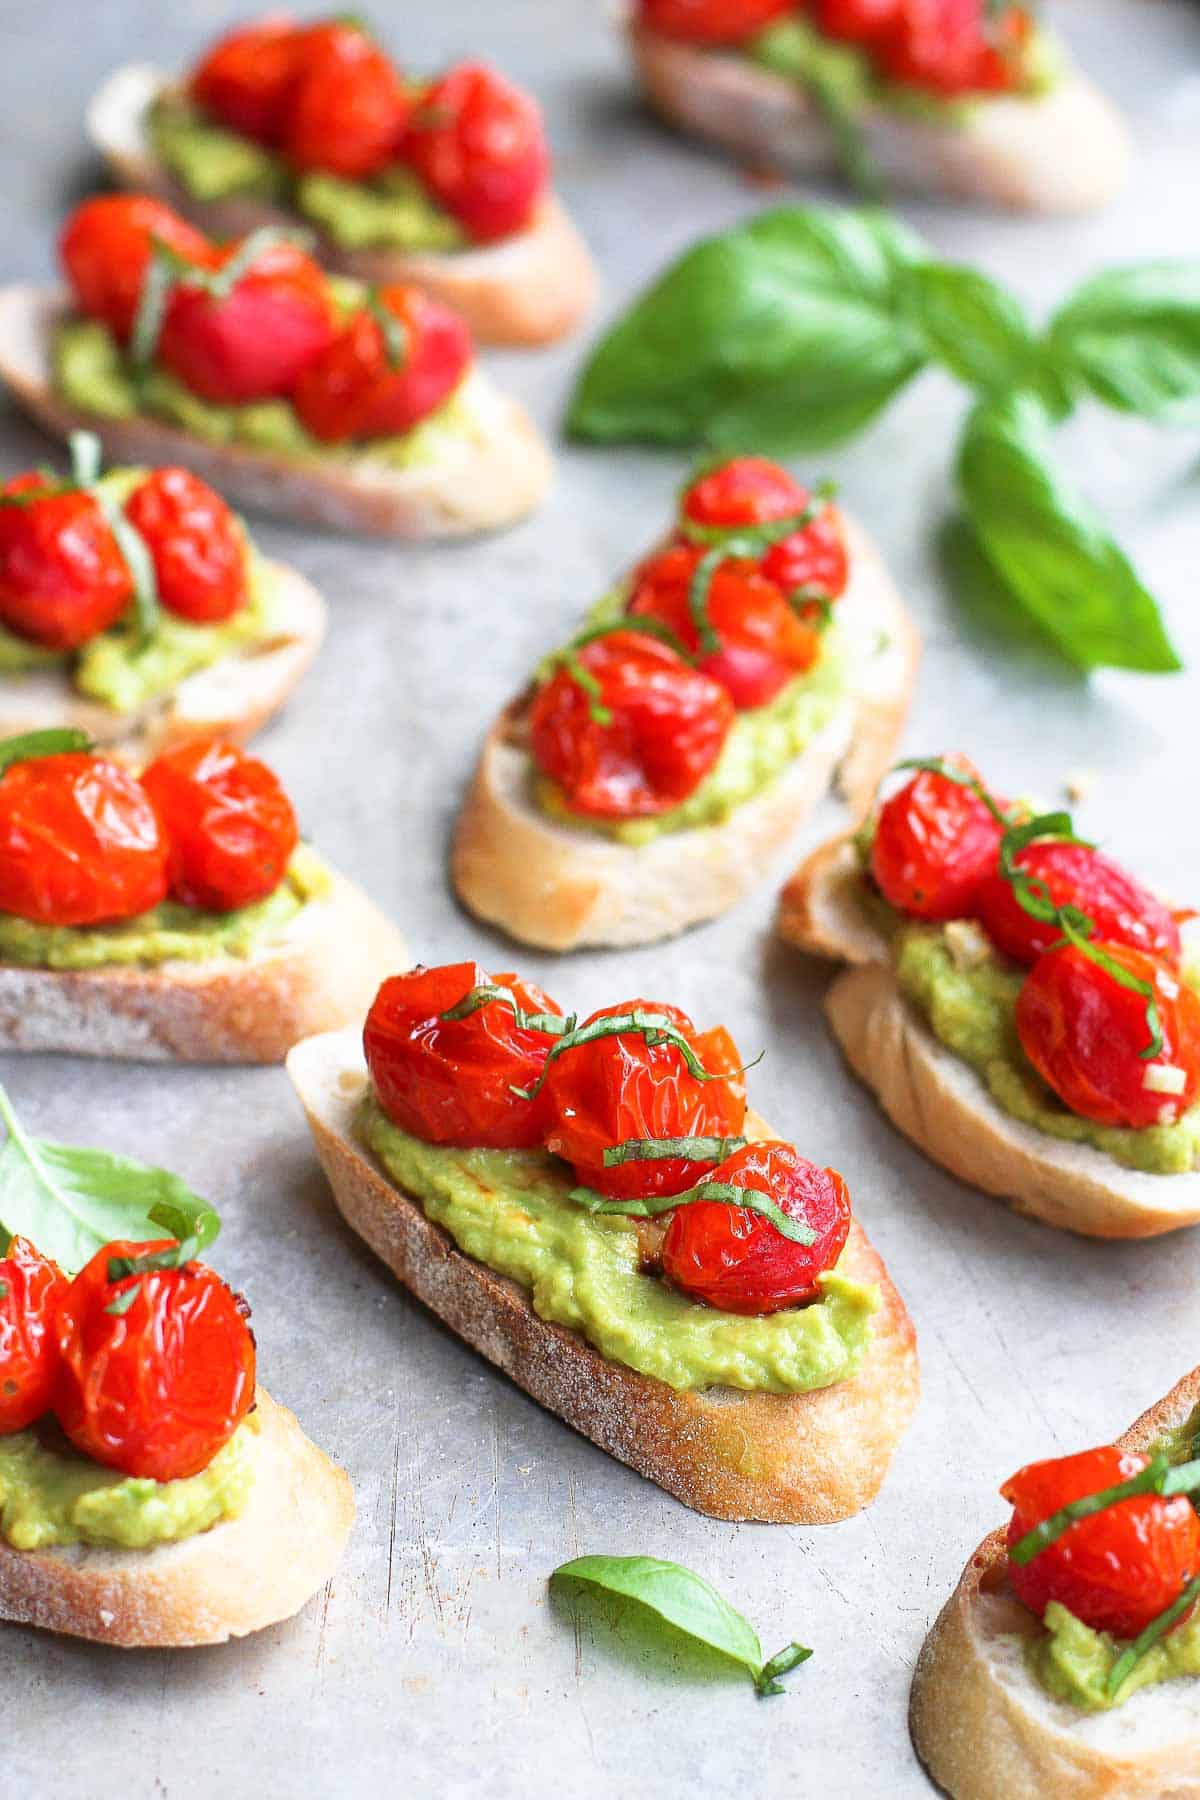 Baguette slices topped with smashed avocado and roasted tomatoes.